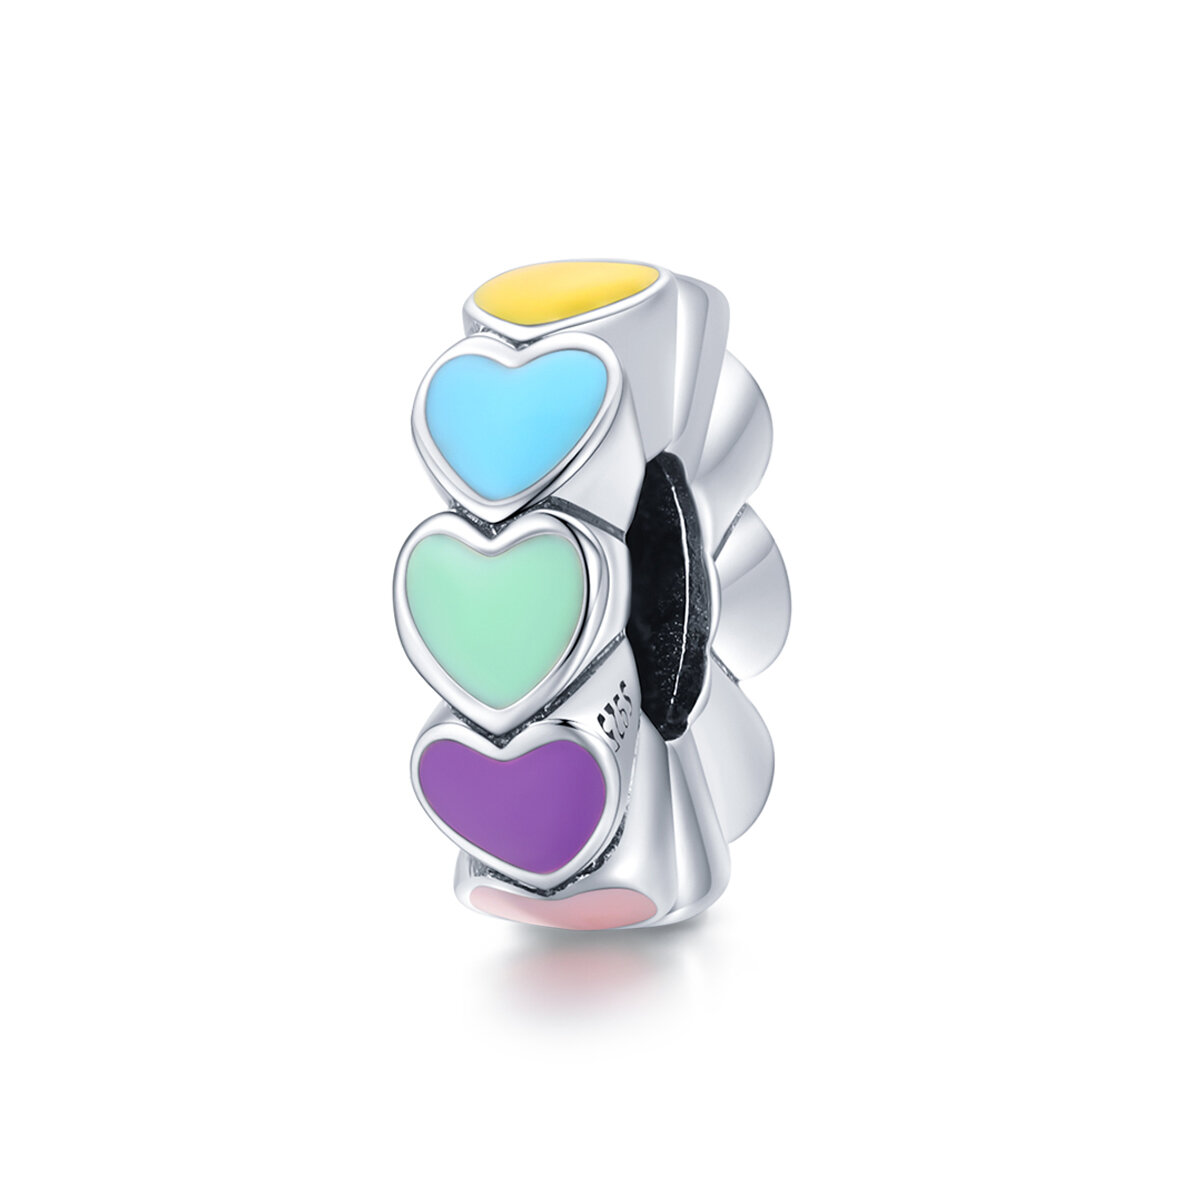 GemKing SCC1838 Candy Honey Love S925 Sterling Silver Charm